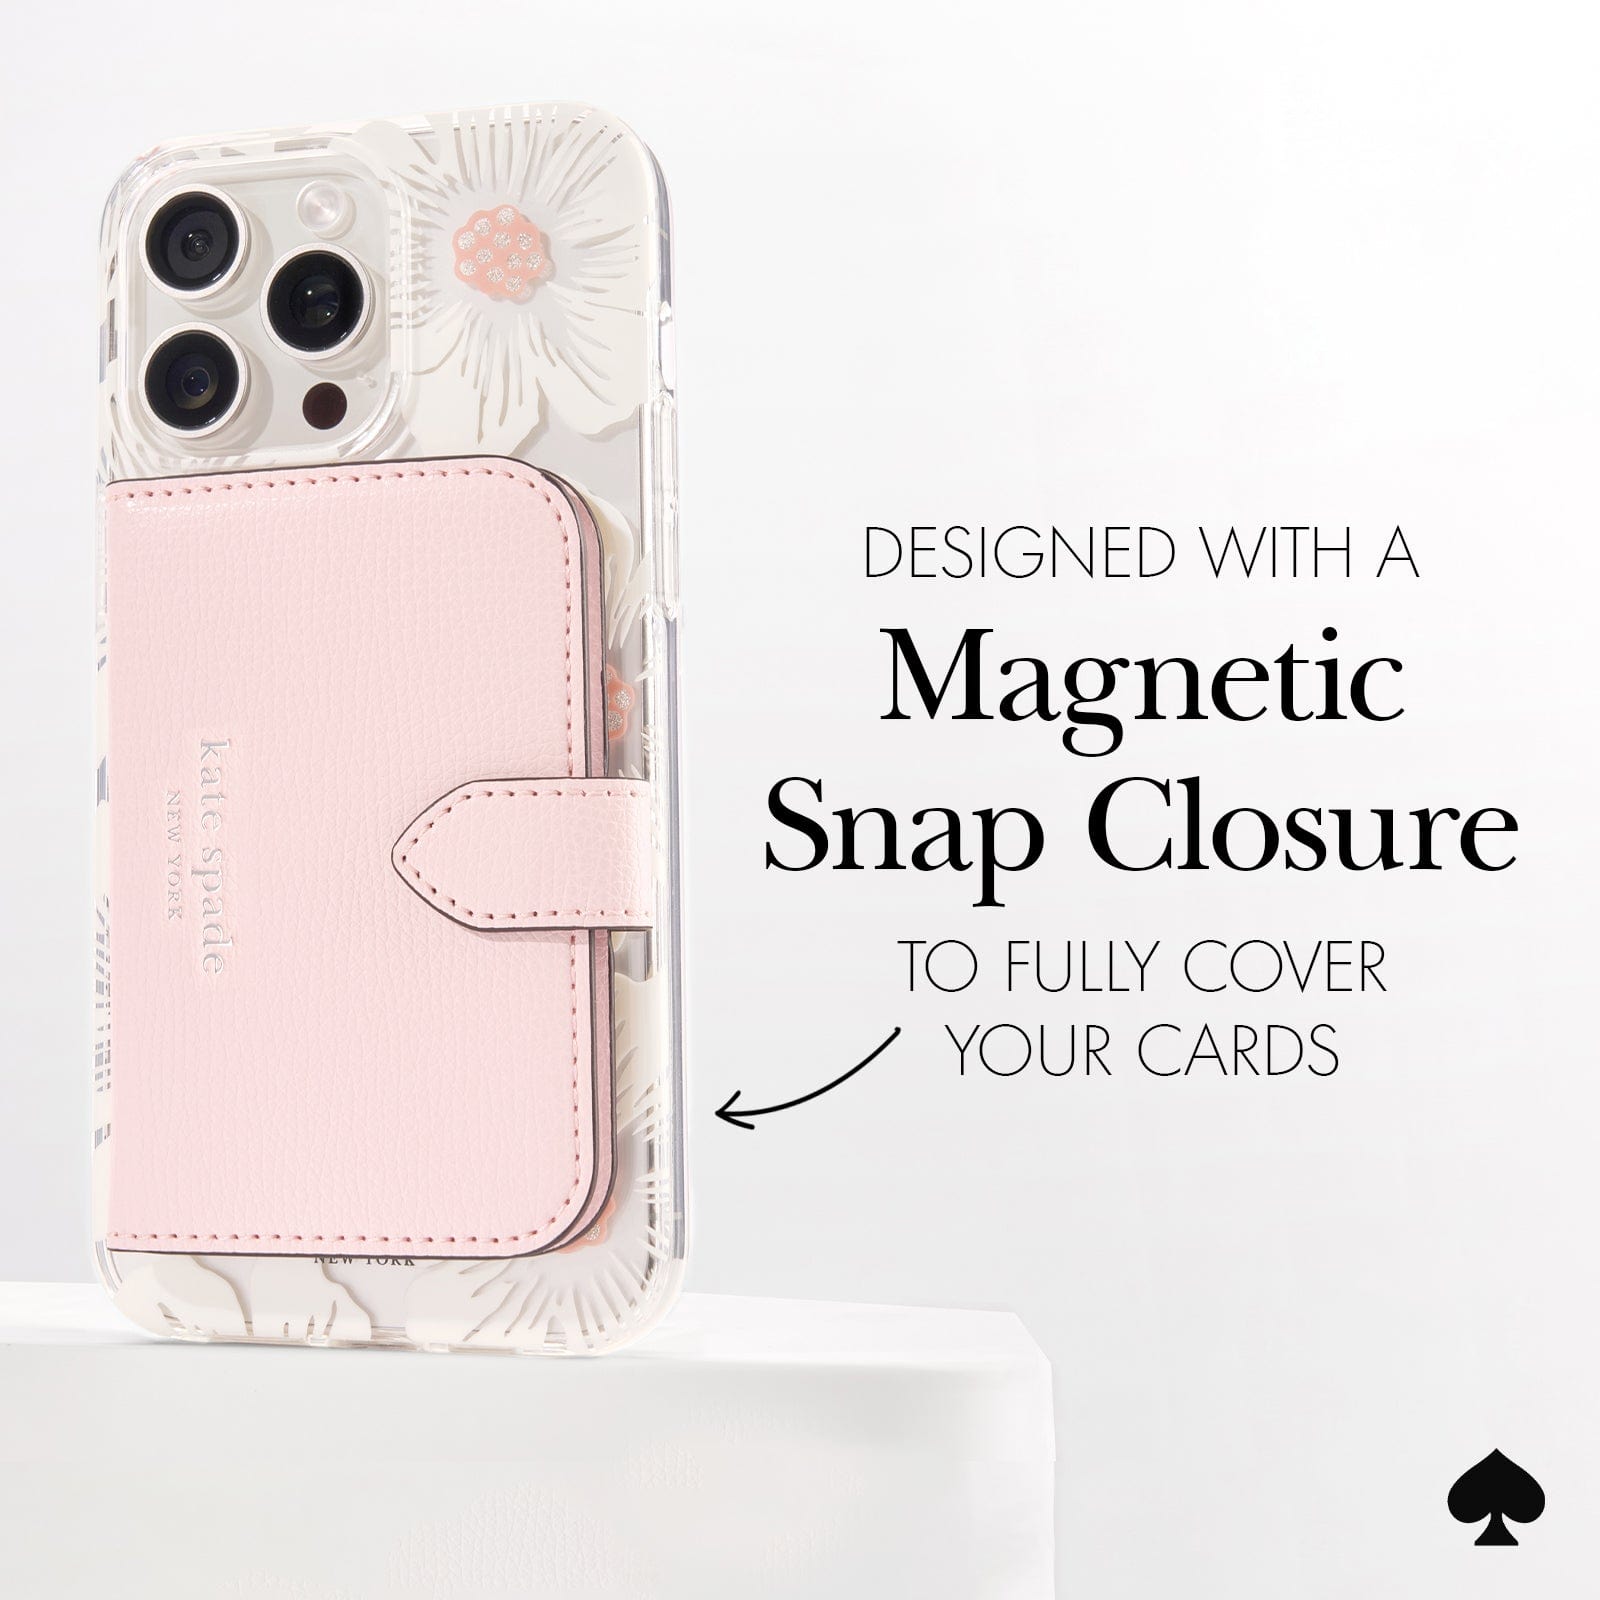 DESIGNED WITH A MAGNETIC SNAP CLOSURE TO FULLY COVER YOUR CARDS